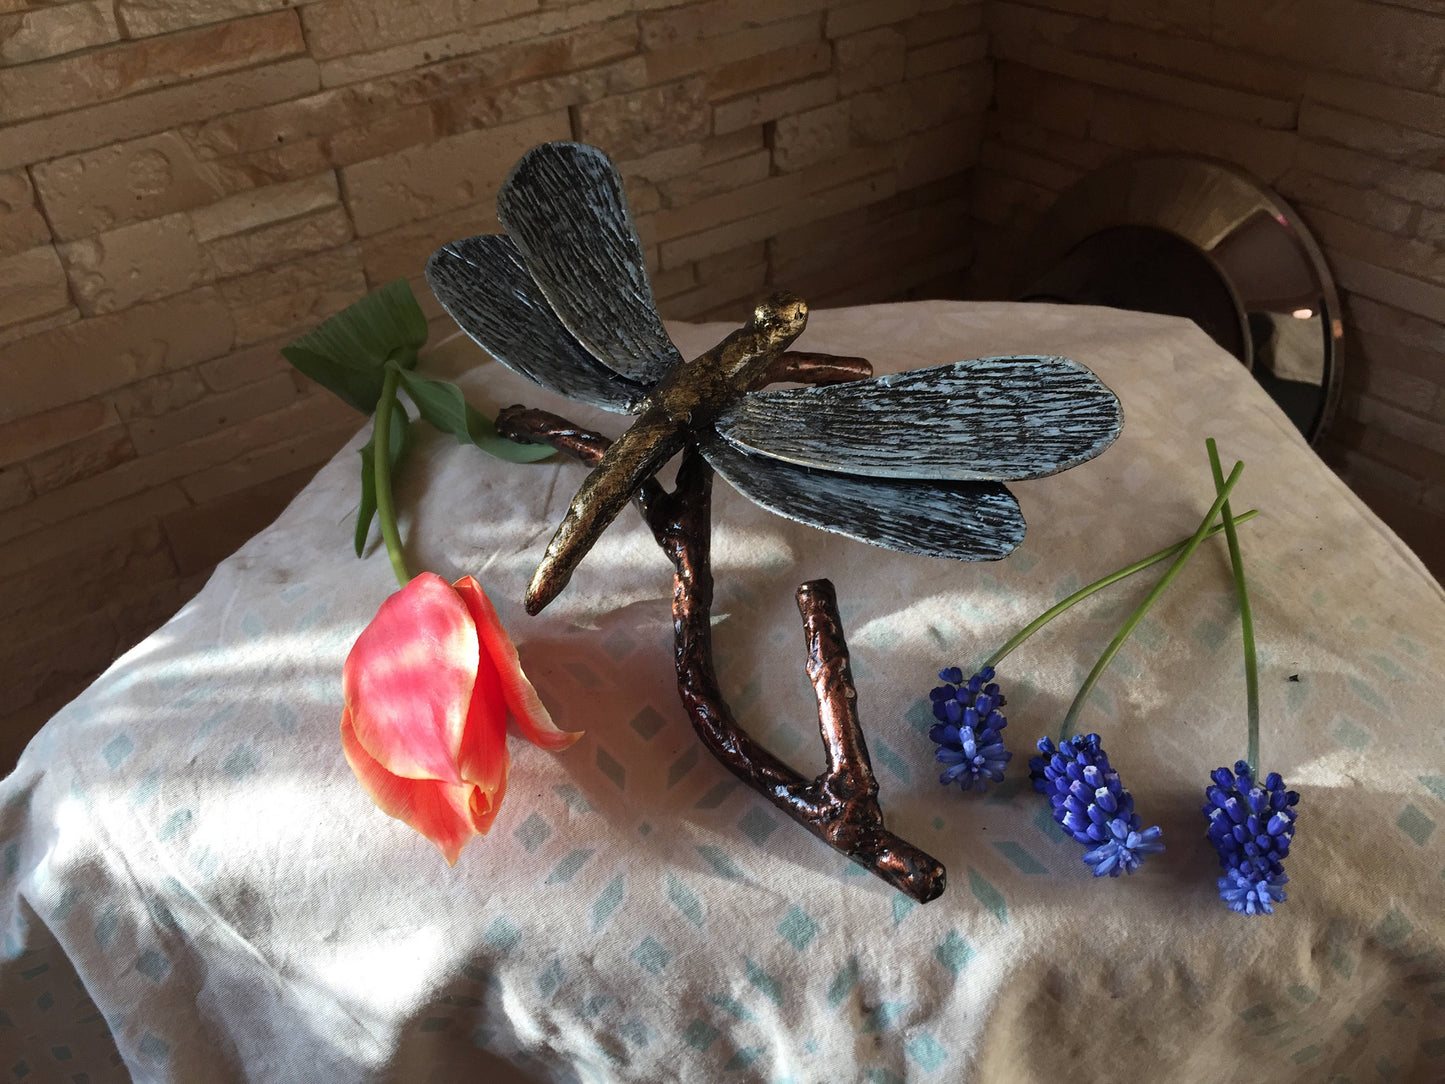 Dragonfly, metal dragonfly, dragonfly figurine, forged dragonfly, metal statue, metal statuette, miniature statuette, nature, insect, art